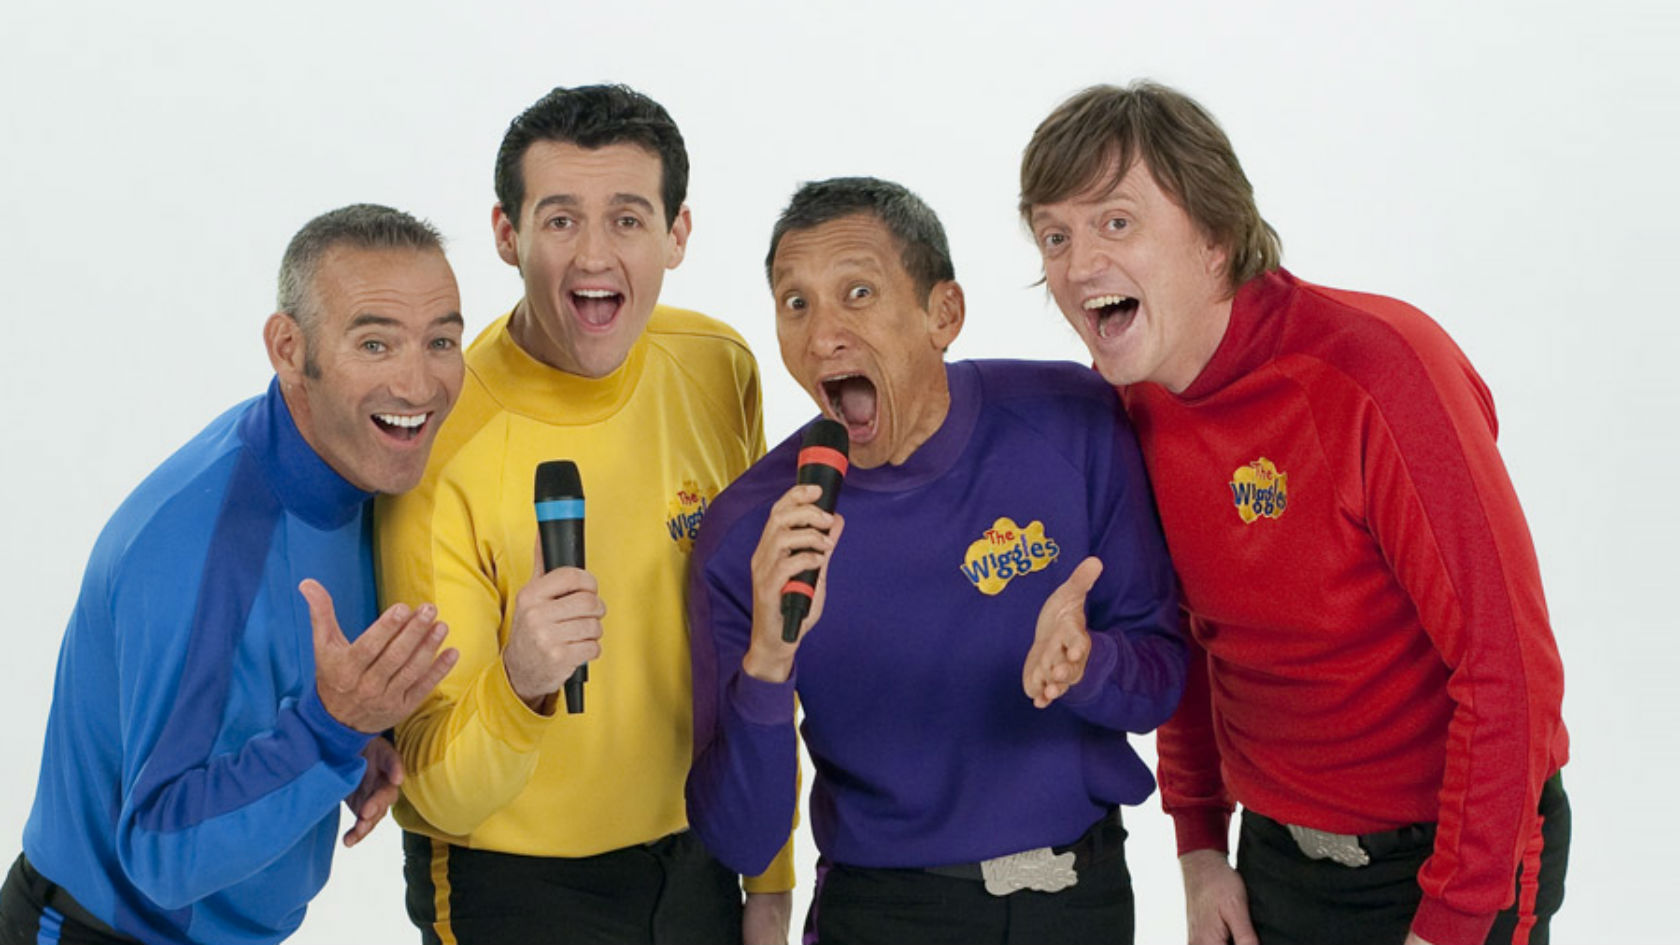 The Wiggles Then And Now